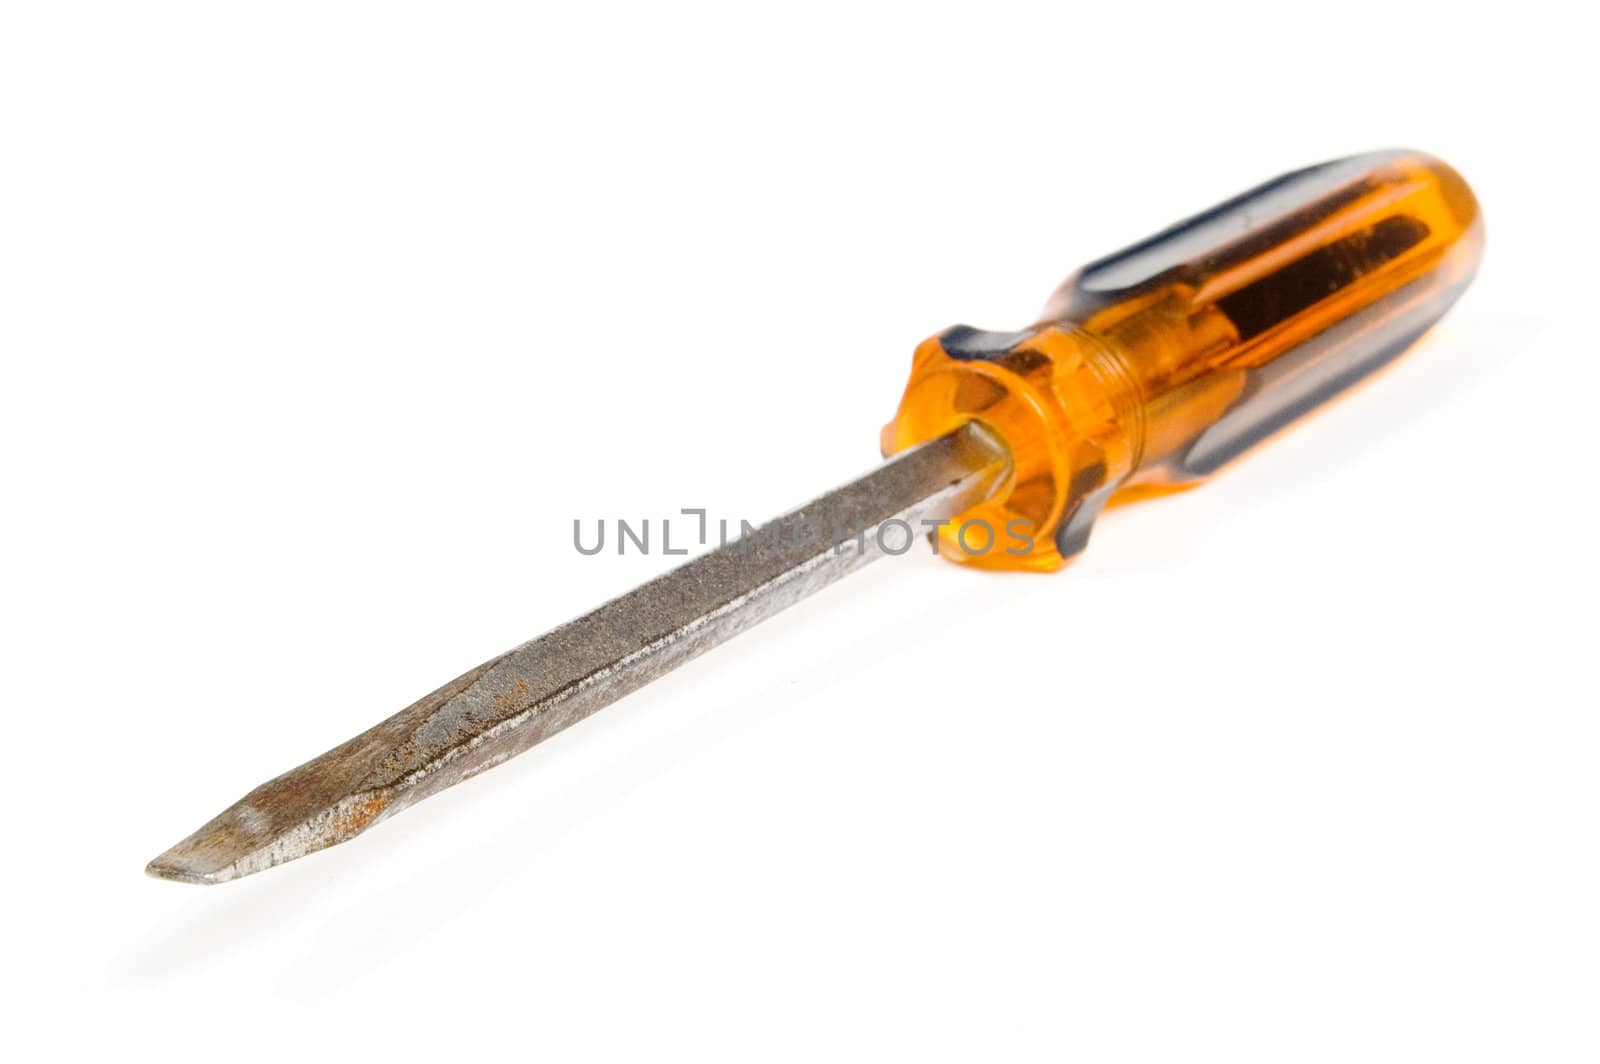 Photo of single screwdriver against the white background